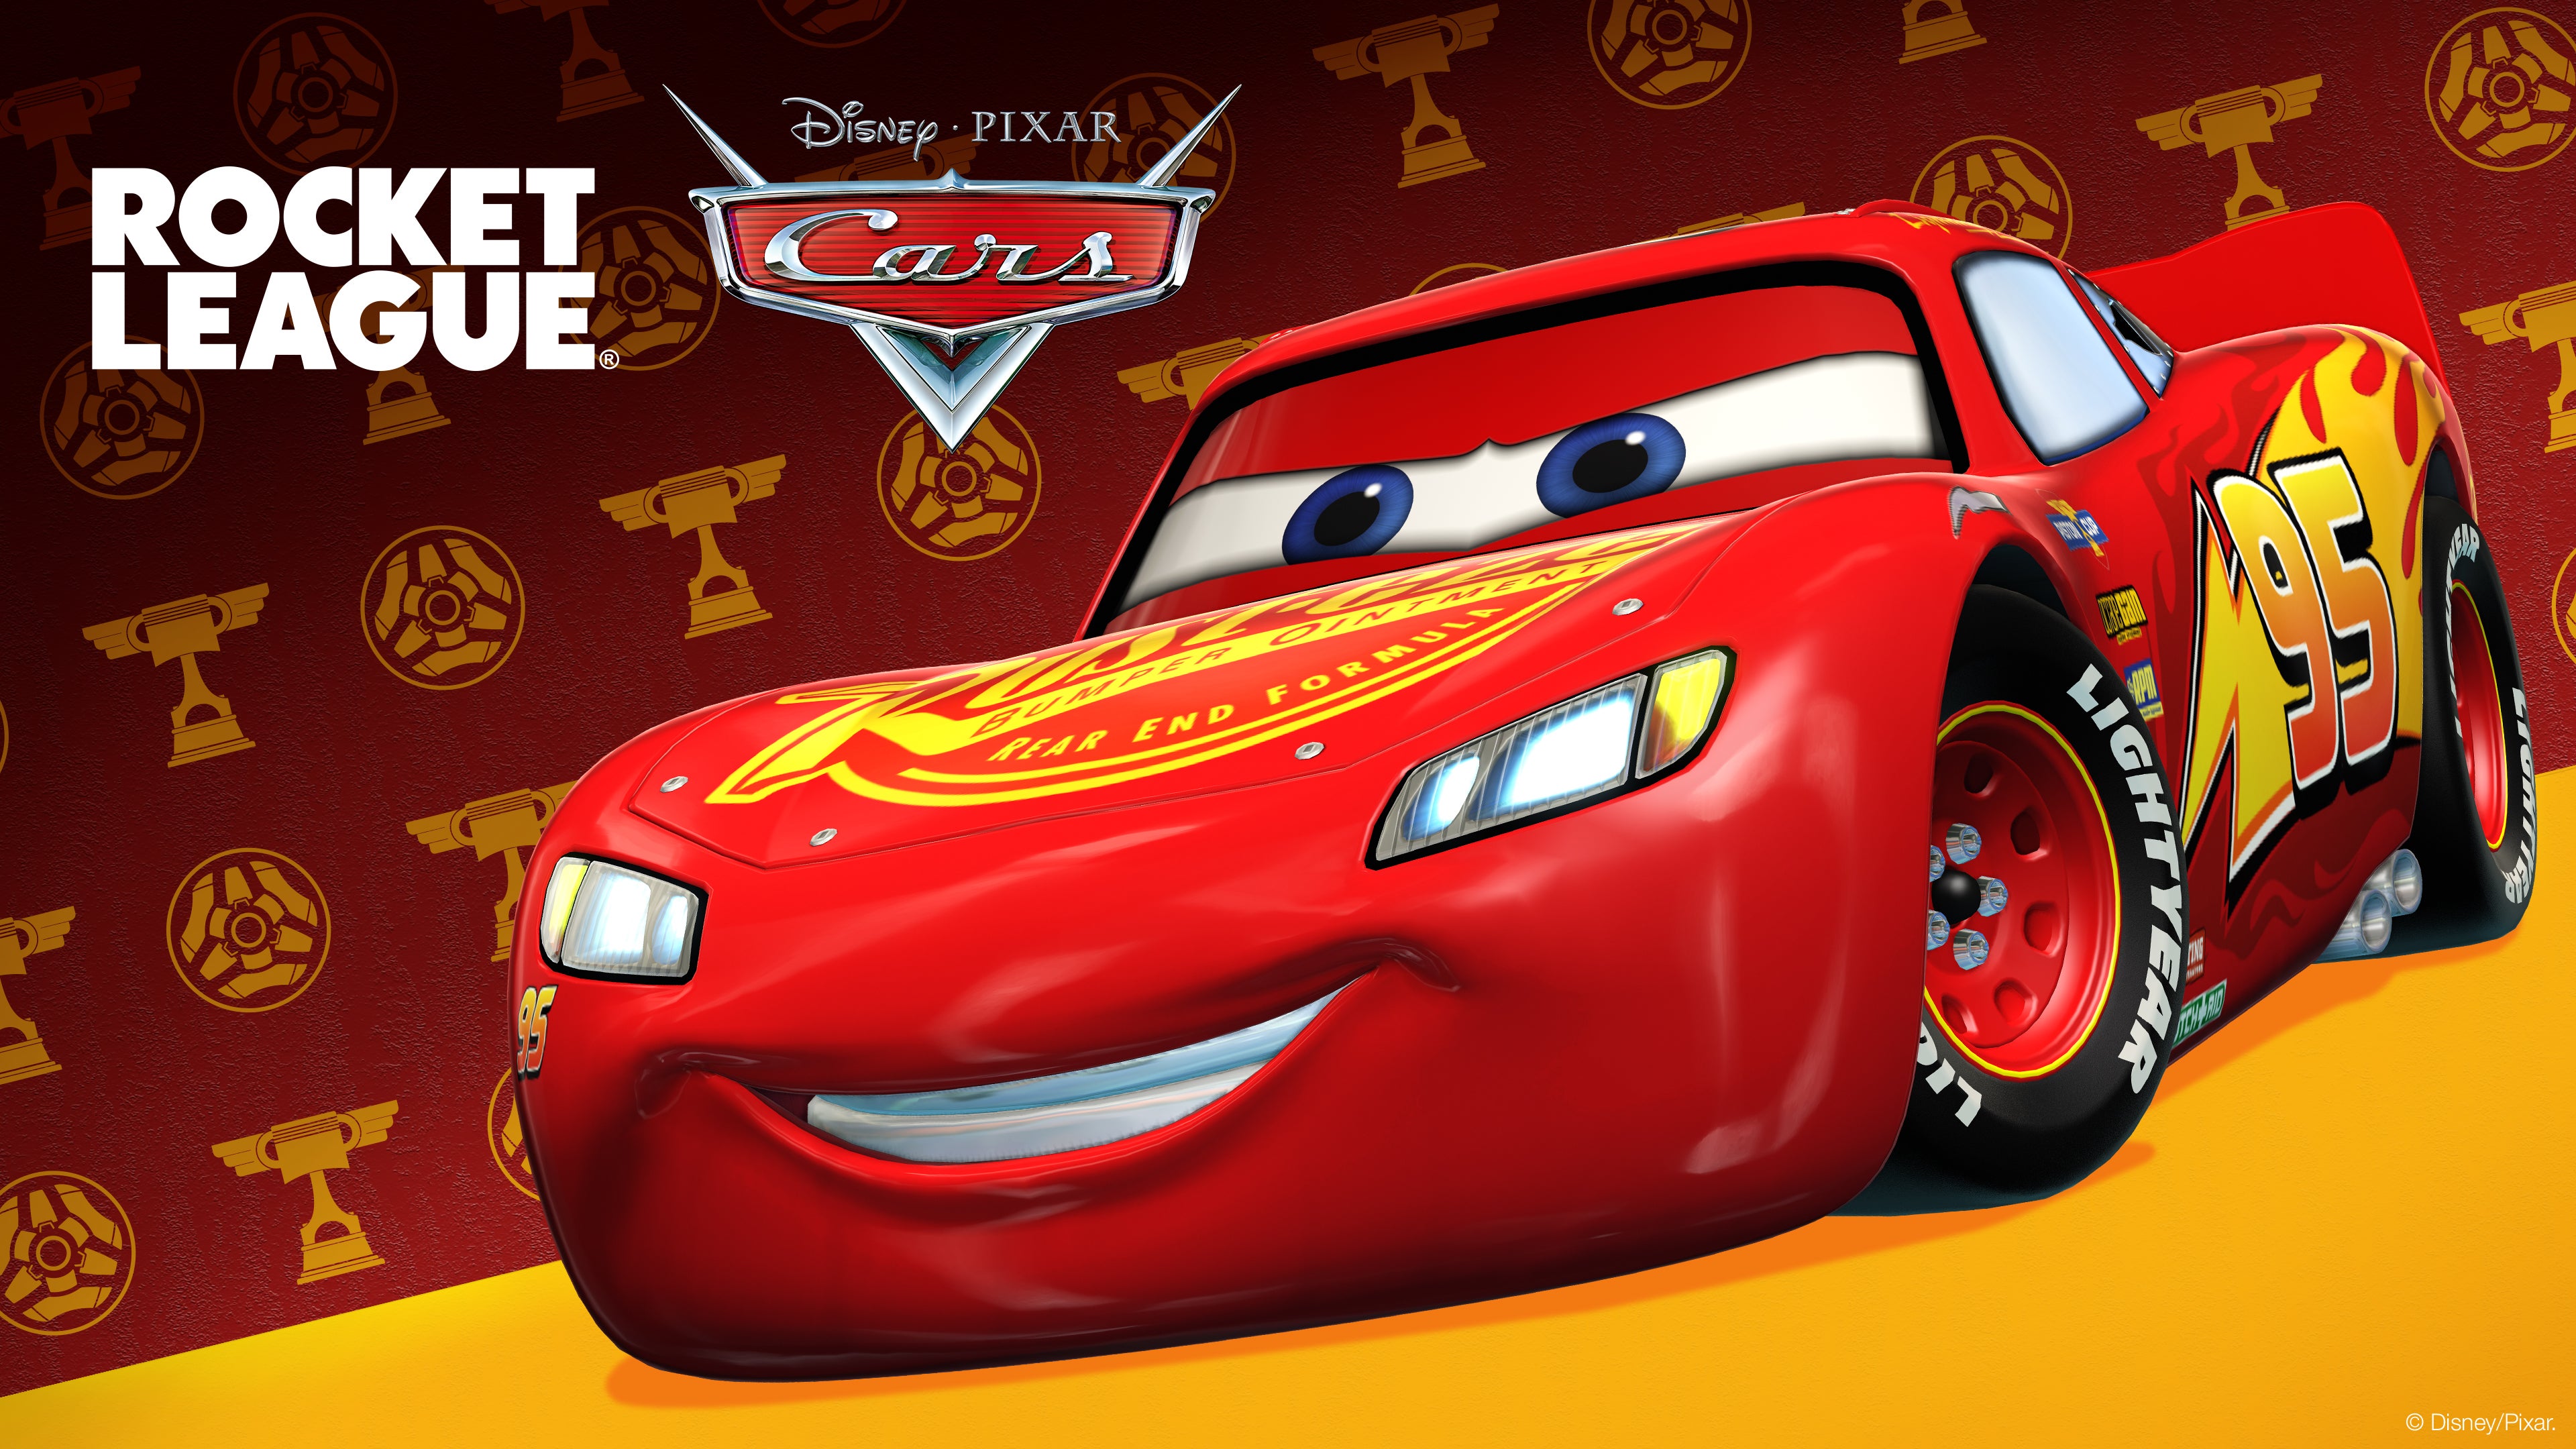 The Lightning McQueen Car Body Hits the Soccar Pitch in Rocket